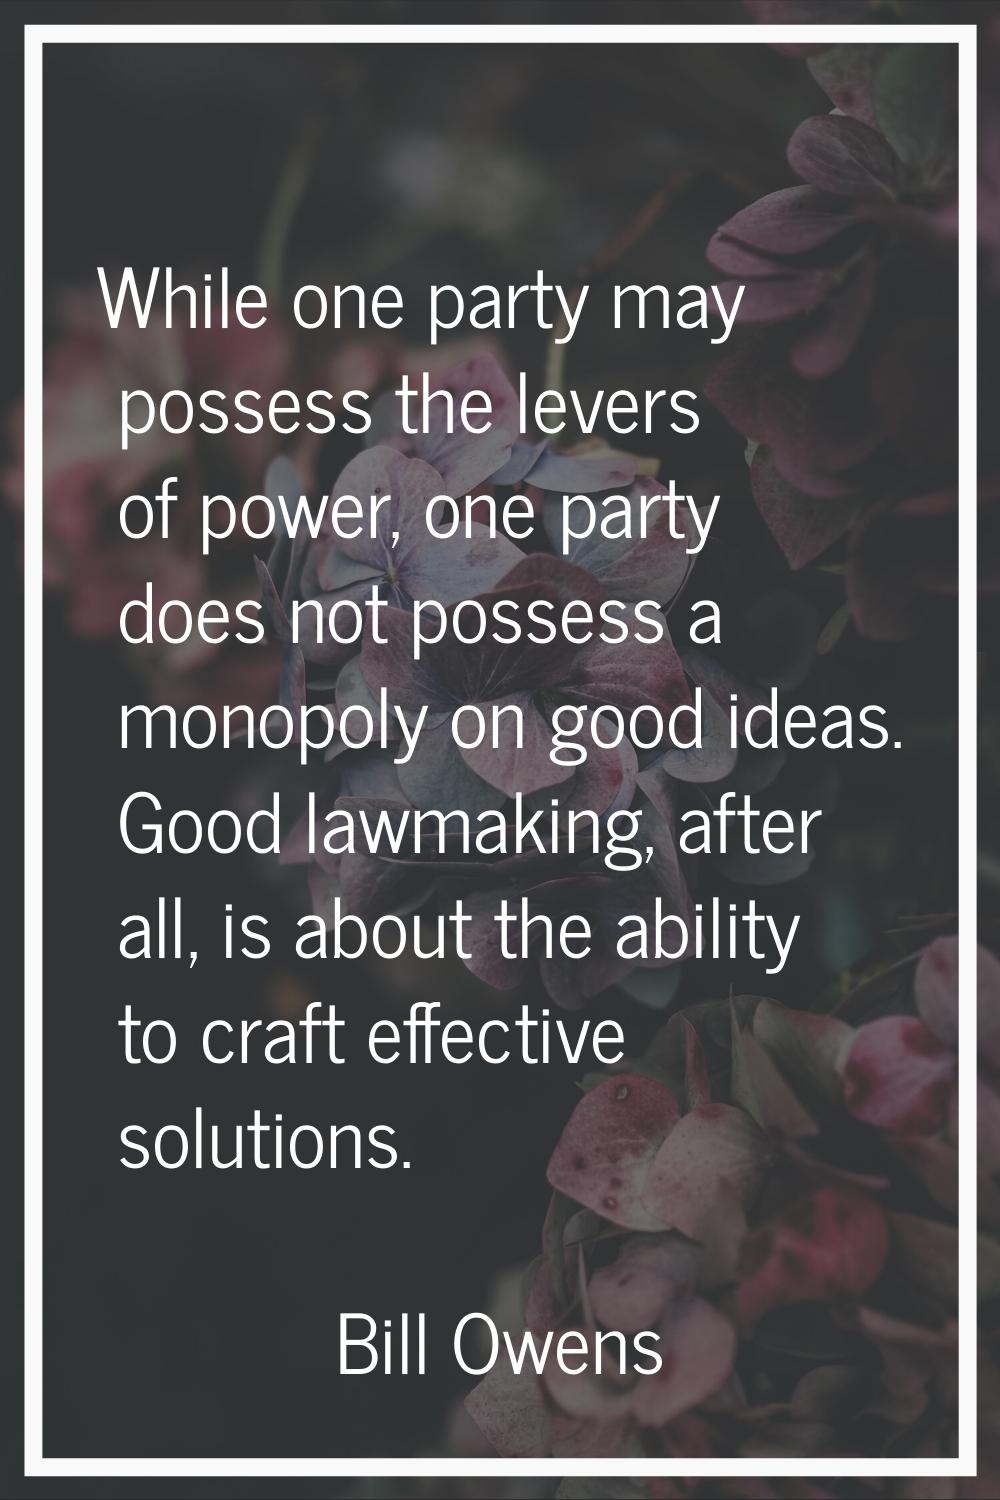 While one party may possess the levers of power, one party does not possess a monopoly on good idea